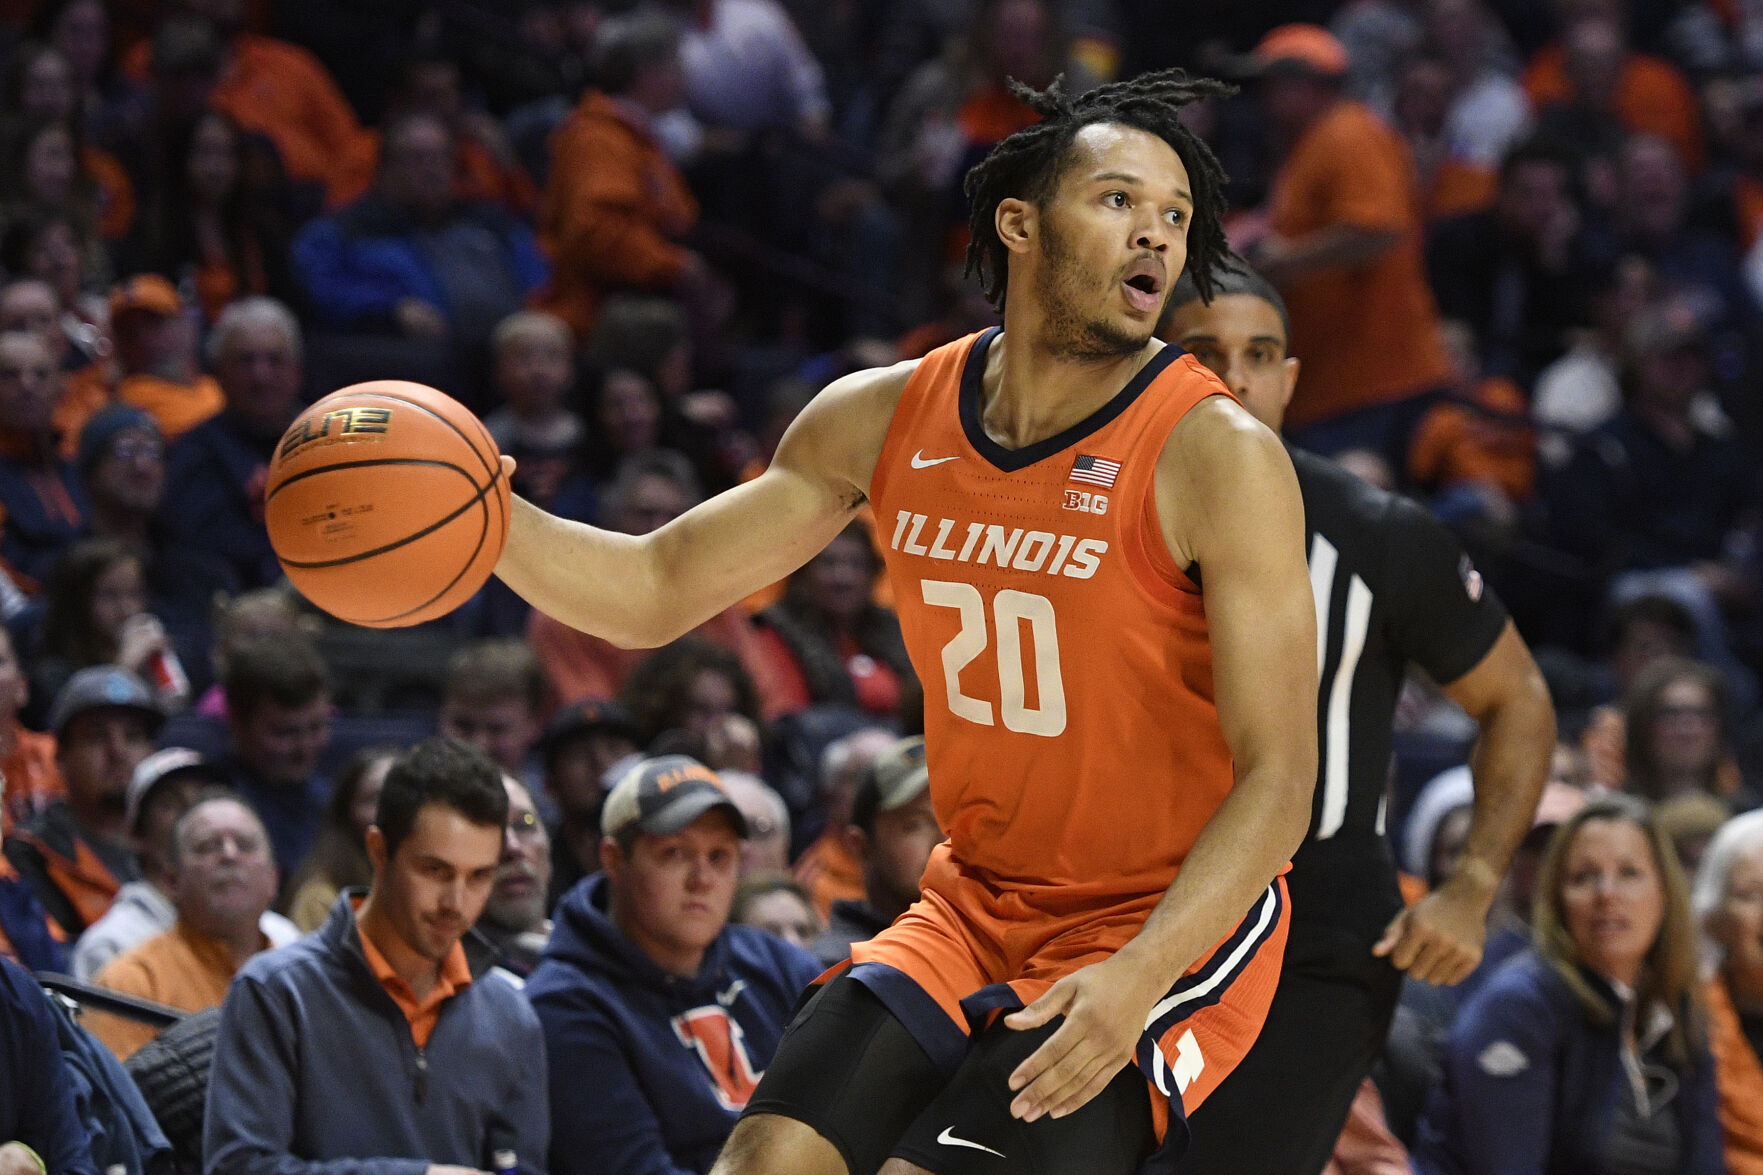 Ty Rodgers 3 facts on the Illinois Fighting Illini basketball player